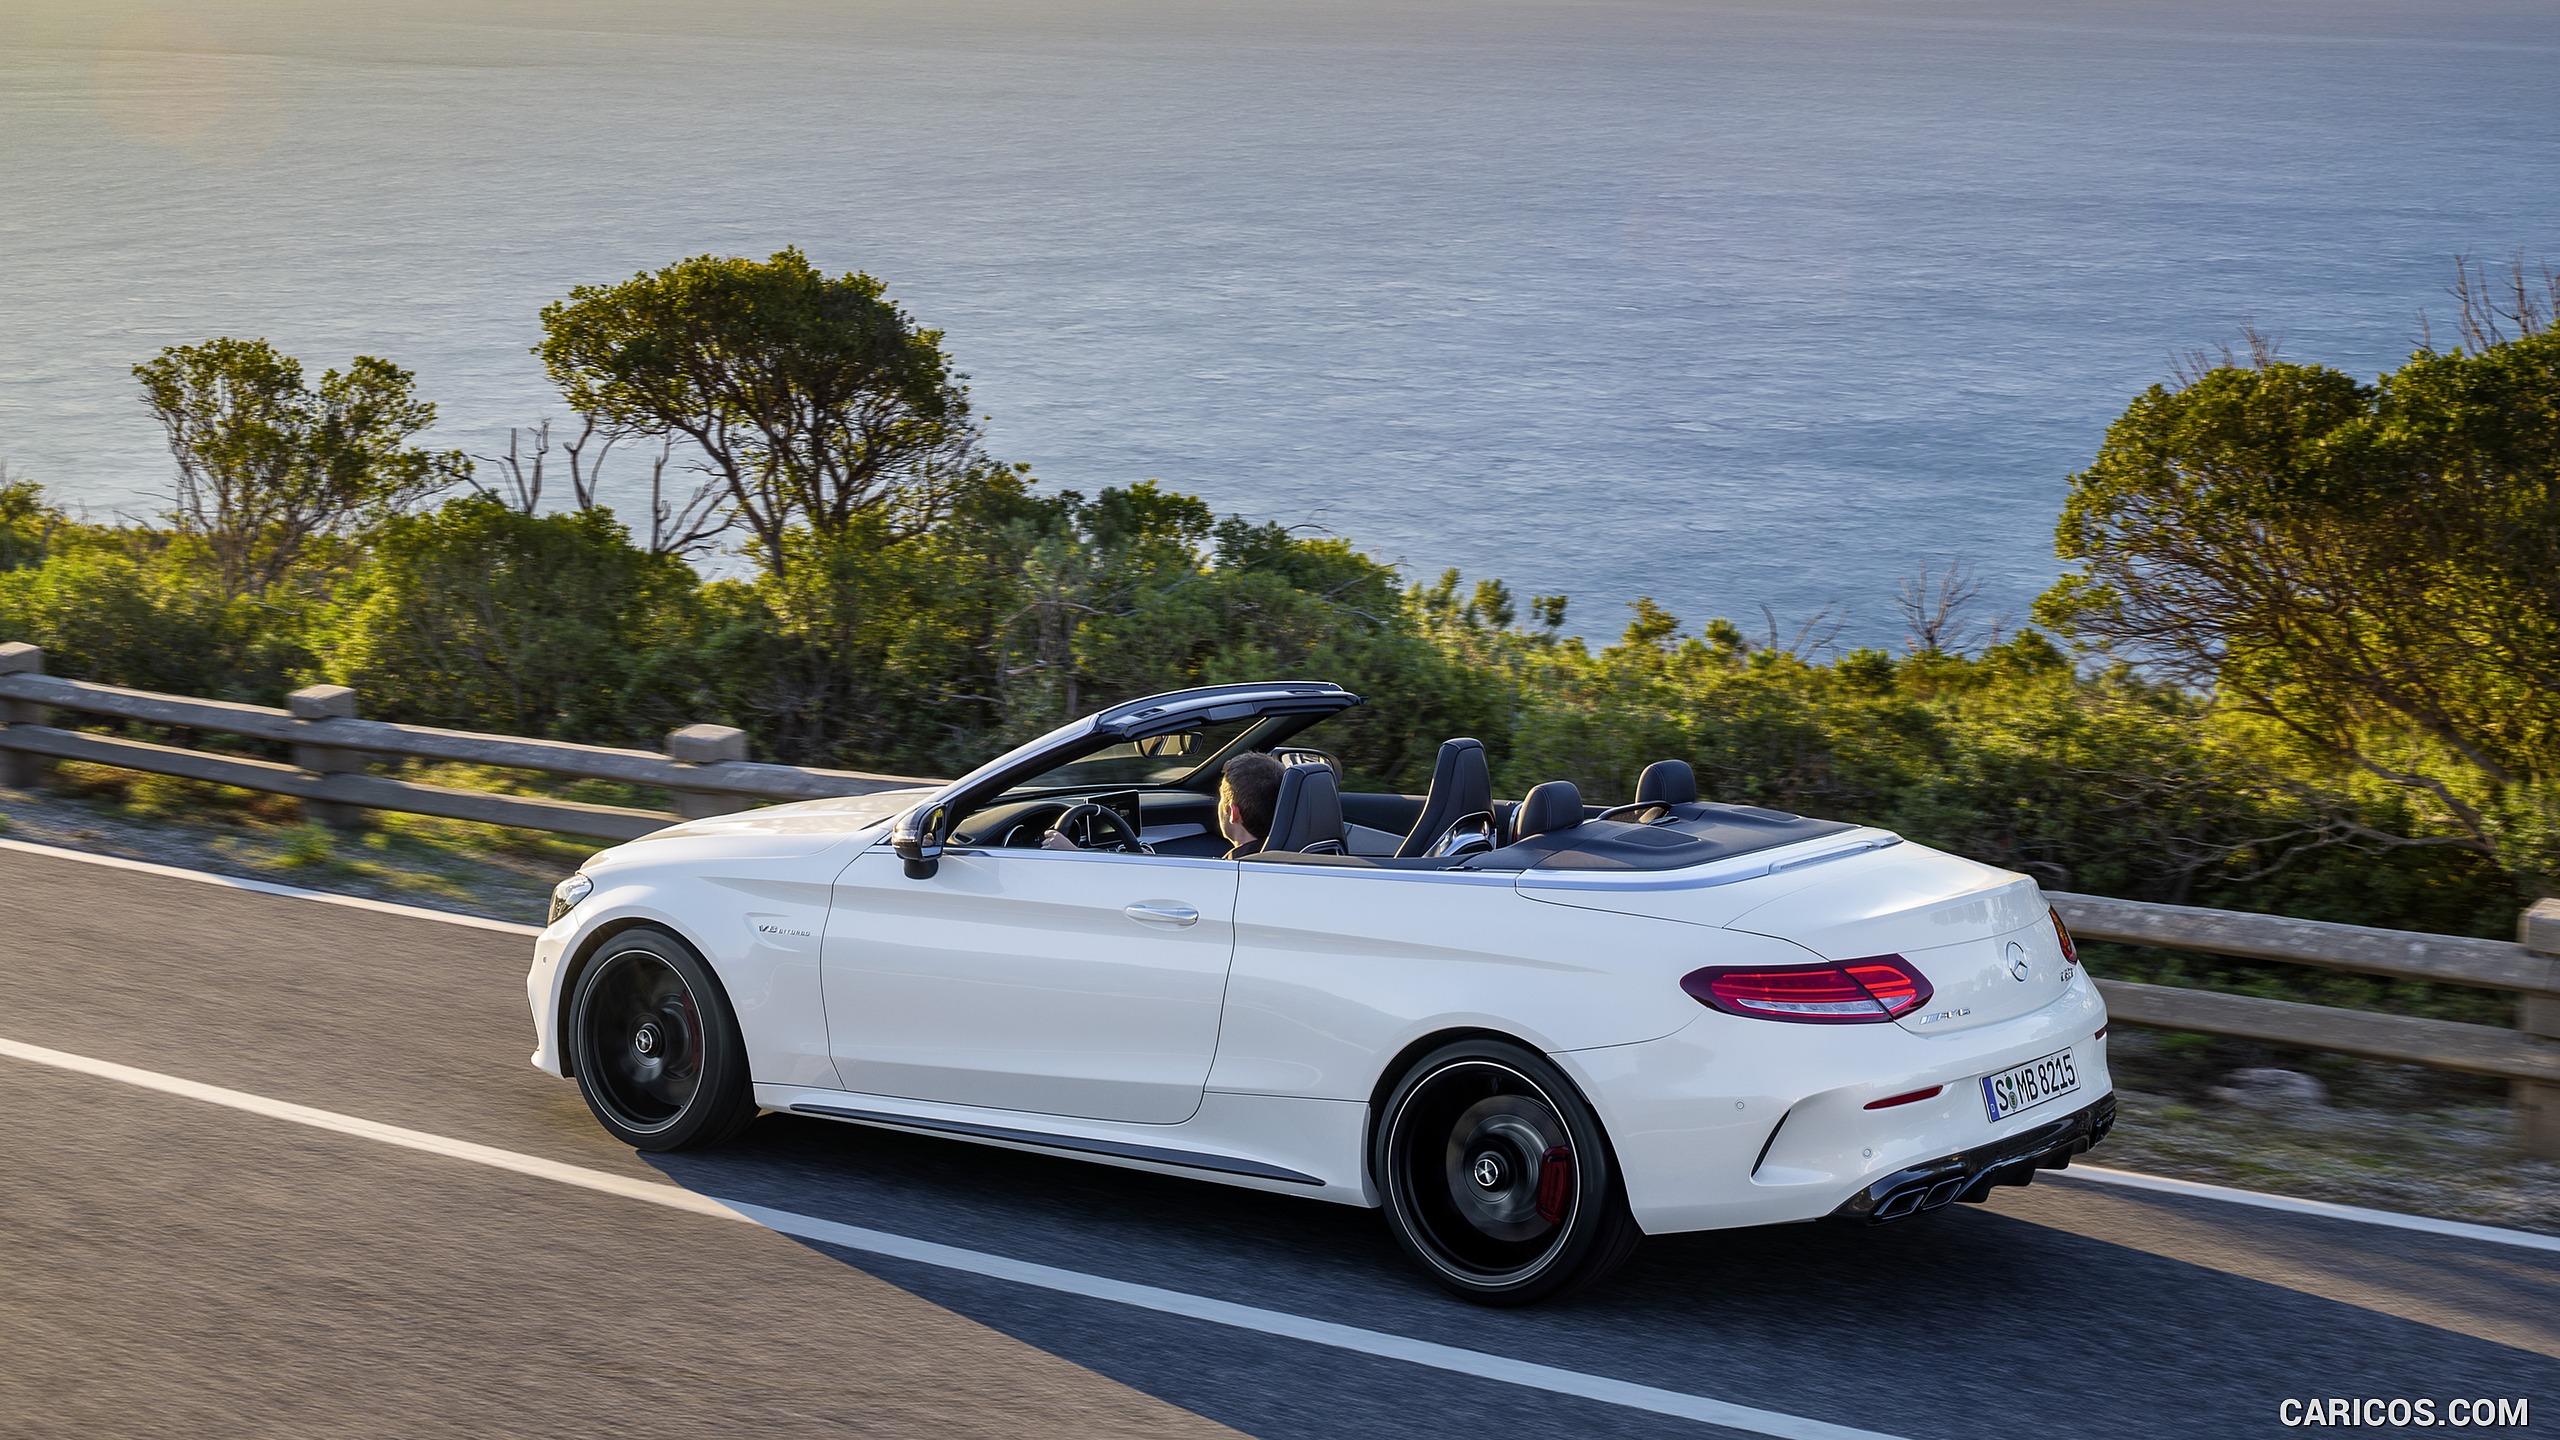 2017 Mercedes-AMG C63 S Cabriolet (Chassis: A205, Color: Designo Diamond White Bright) - Side, #7 of 222